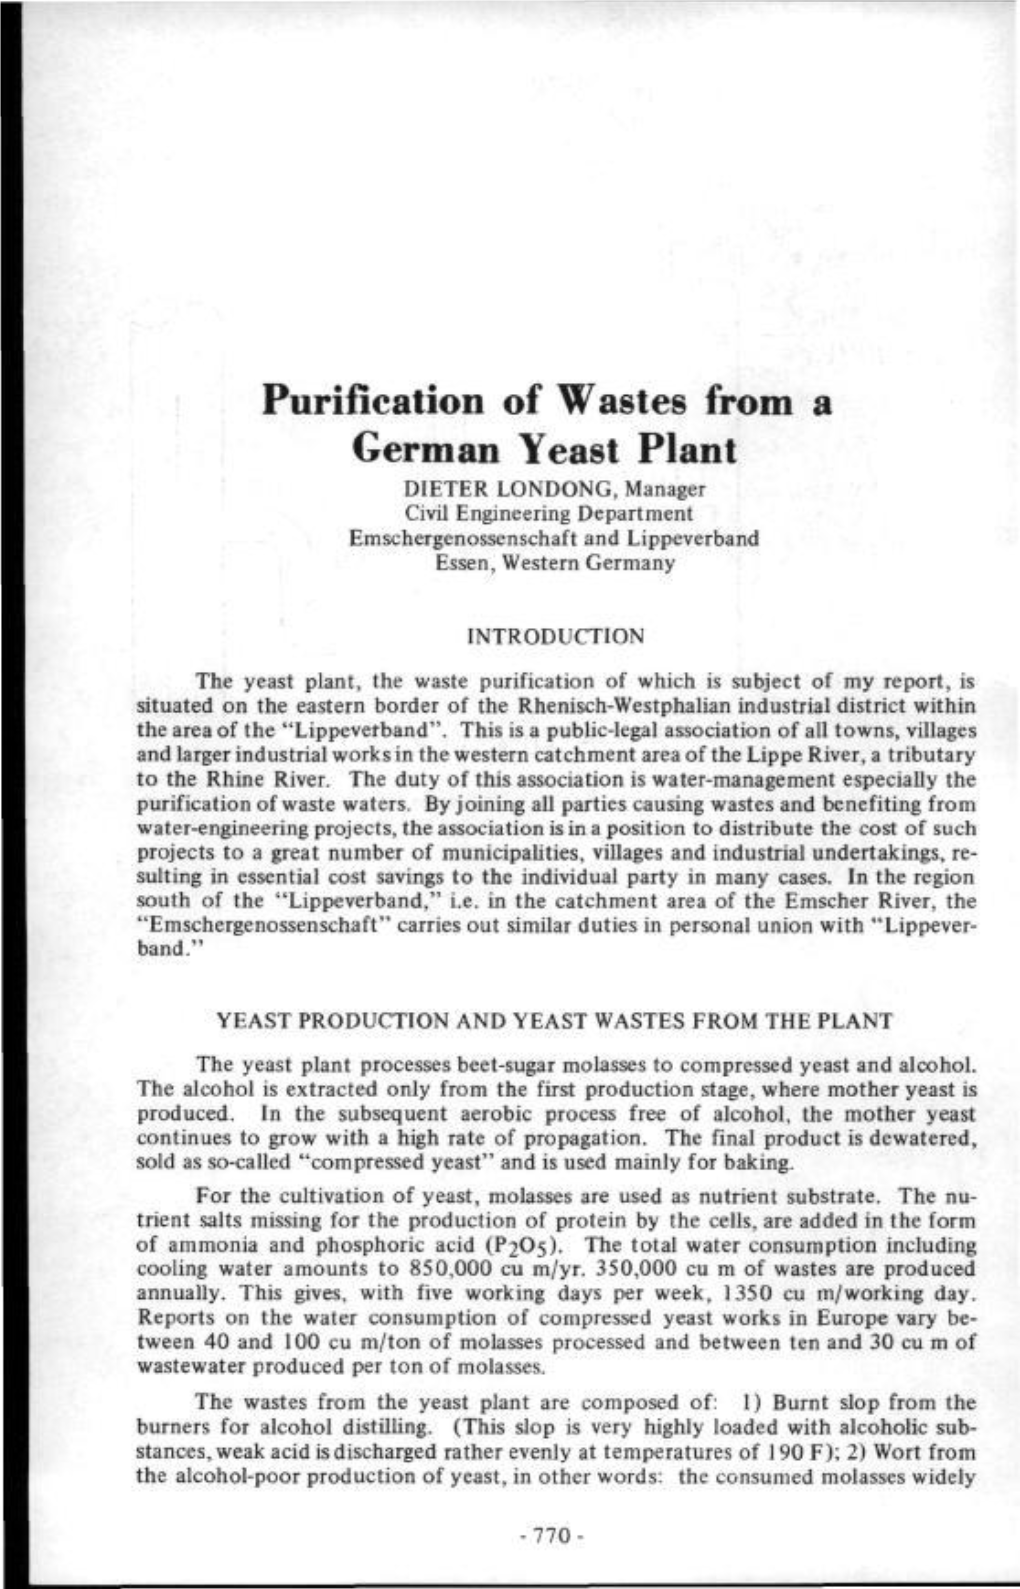 Purification of Wastes from a German Yeast Plant DIETER LONDONG, Manager Civil Engineering Department Emschergenossenschaft and Lippeverband Essen, Western Germany